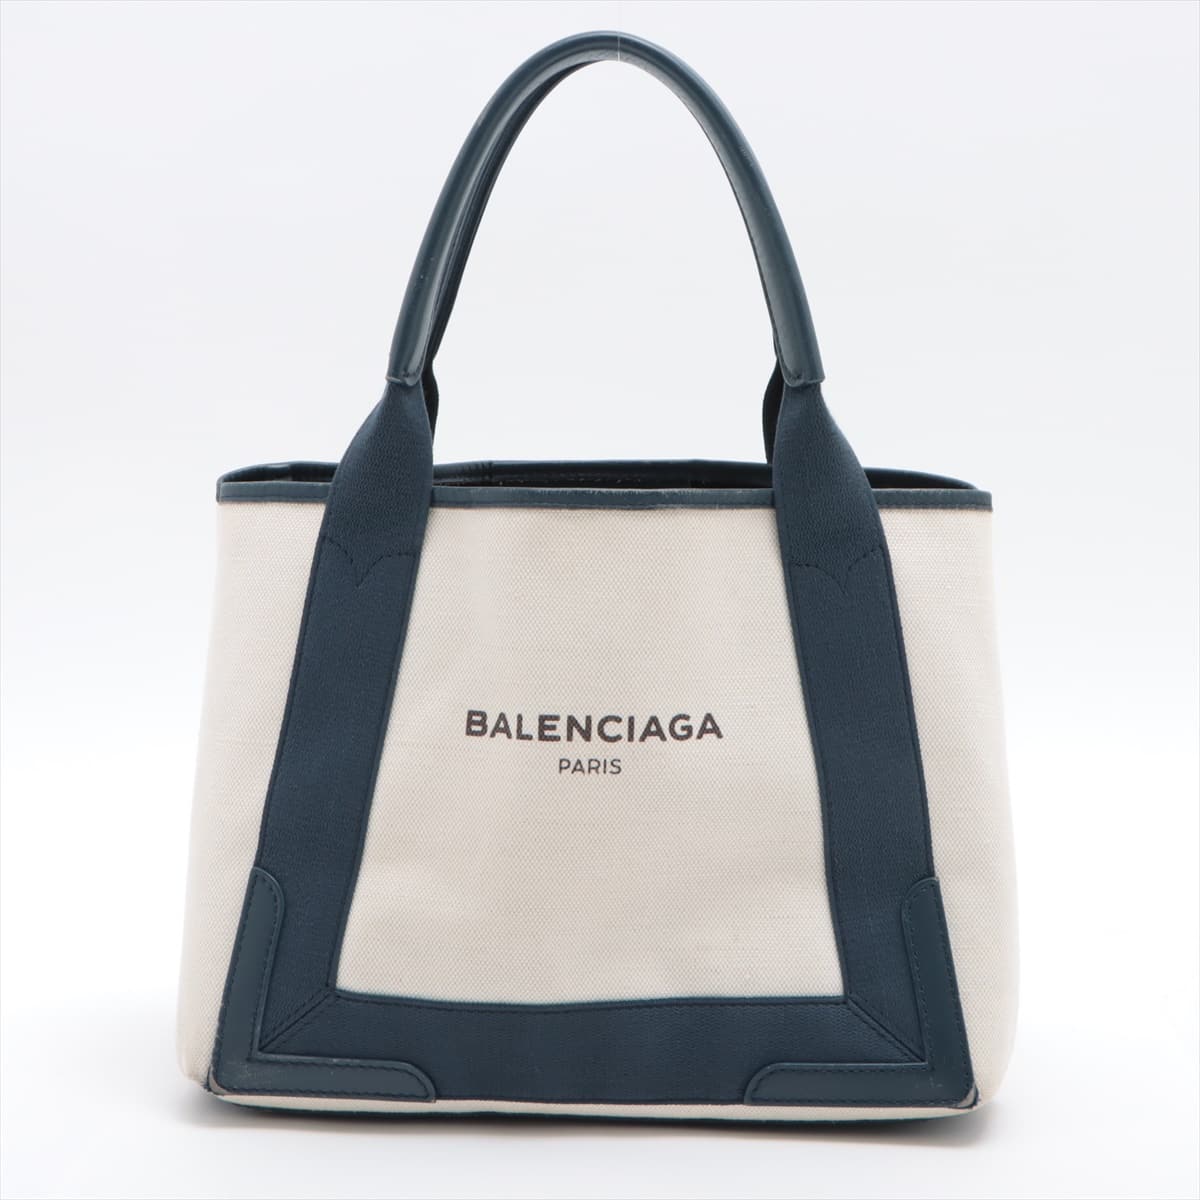 Balenciaga Navy Cabas Canvas & leather Hand bag Navy blue 339933  with pouch